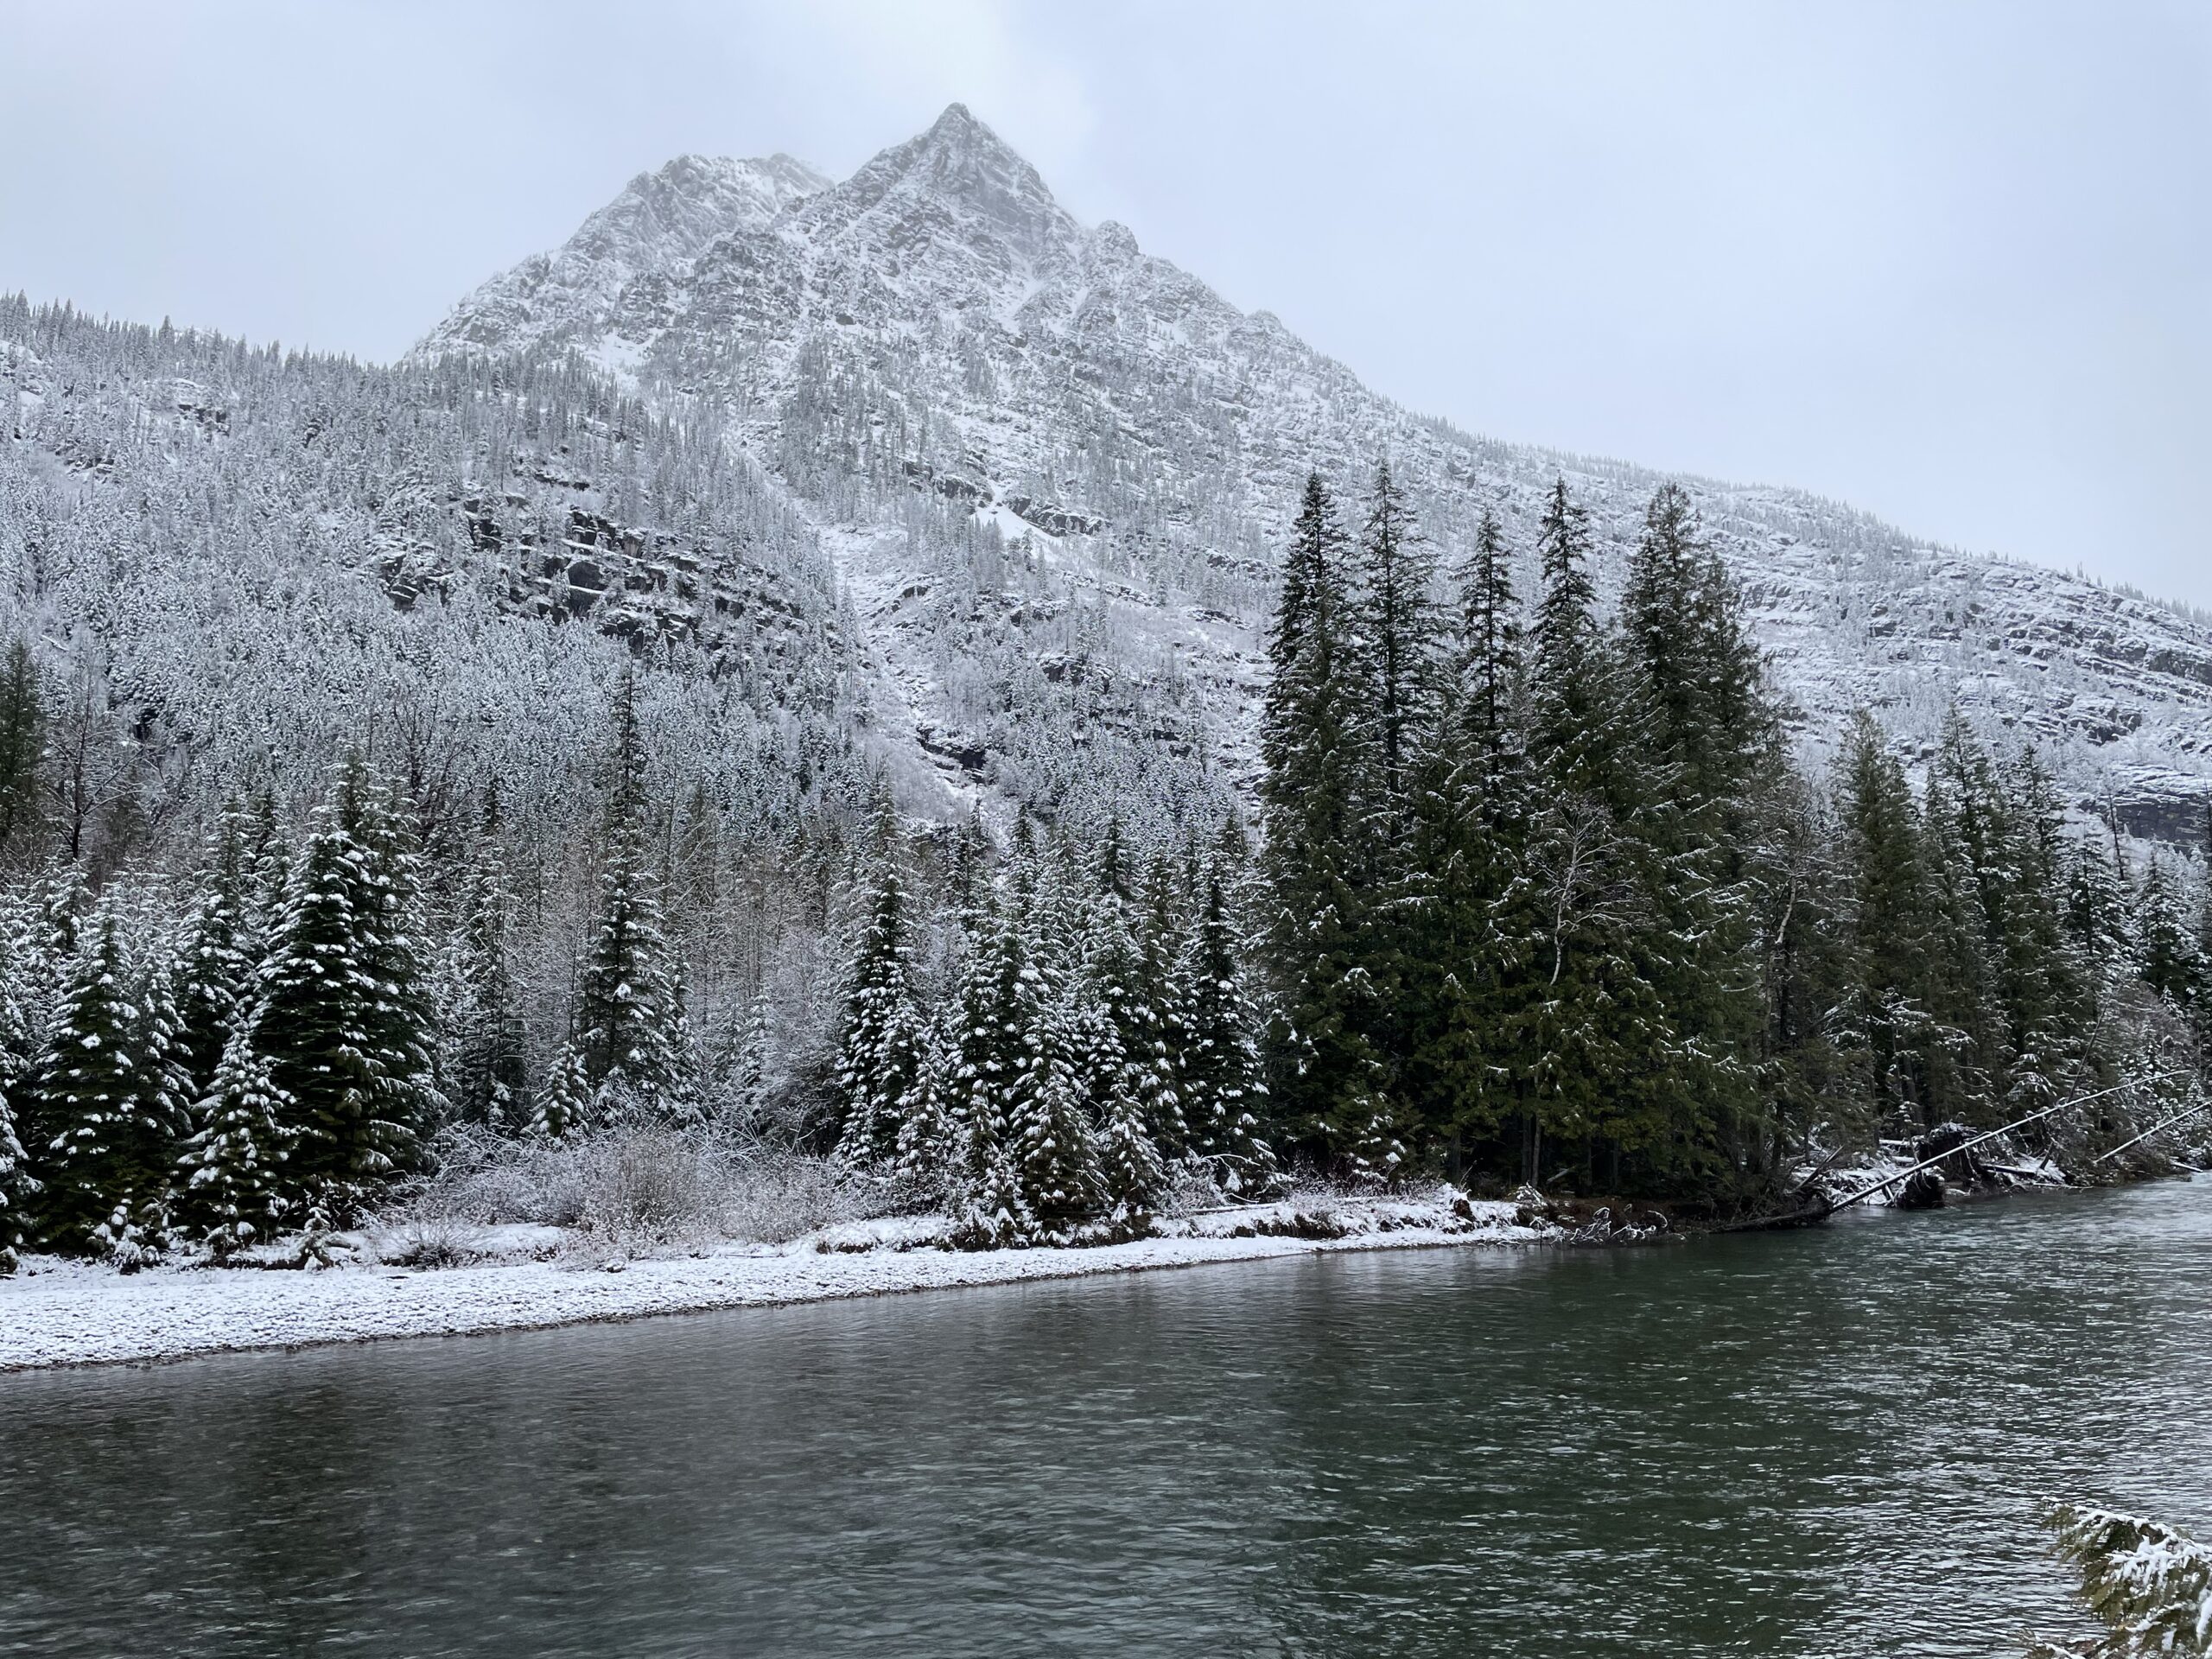 Snow blankets the mountains above McDonald Creek